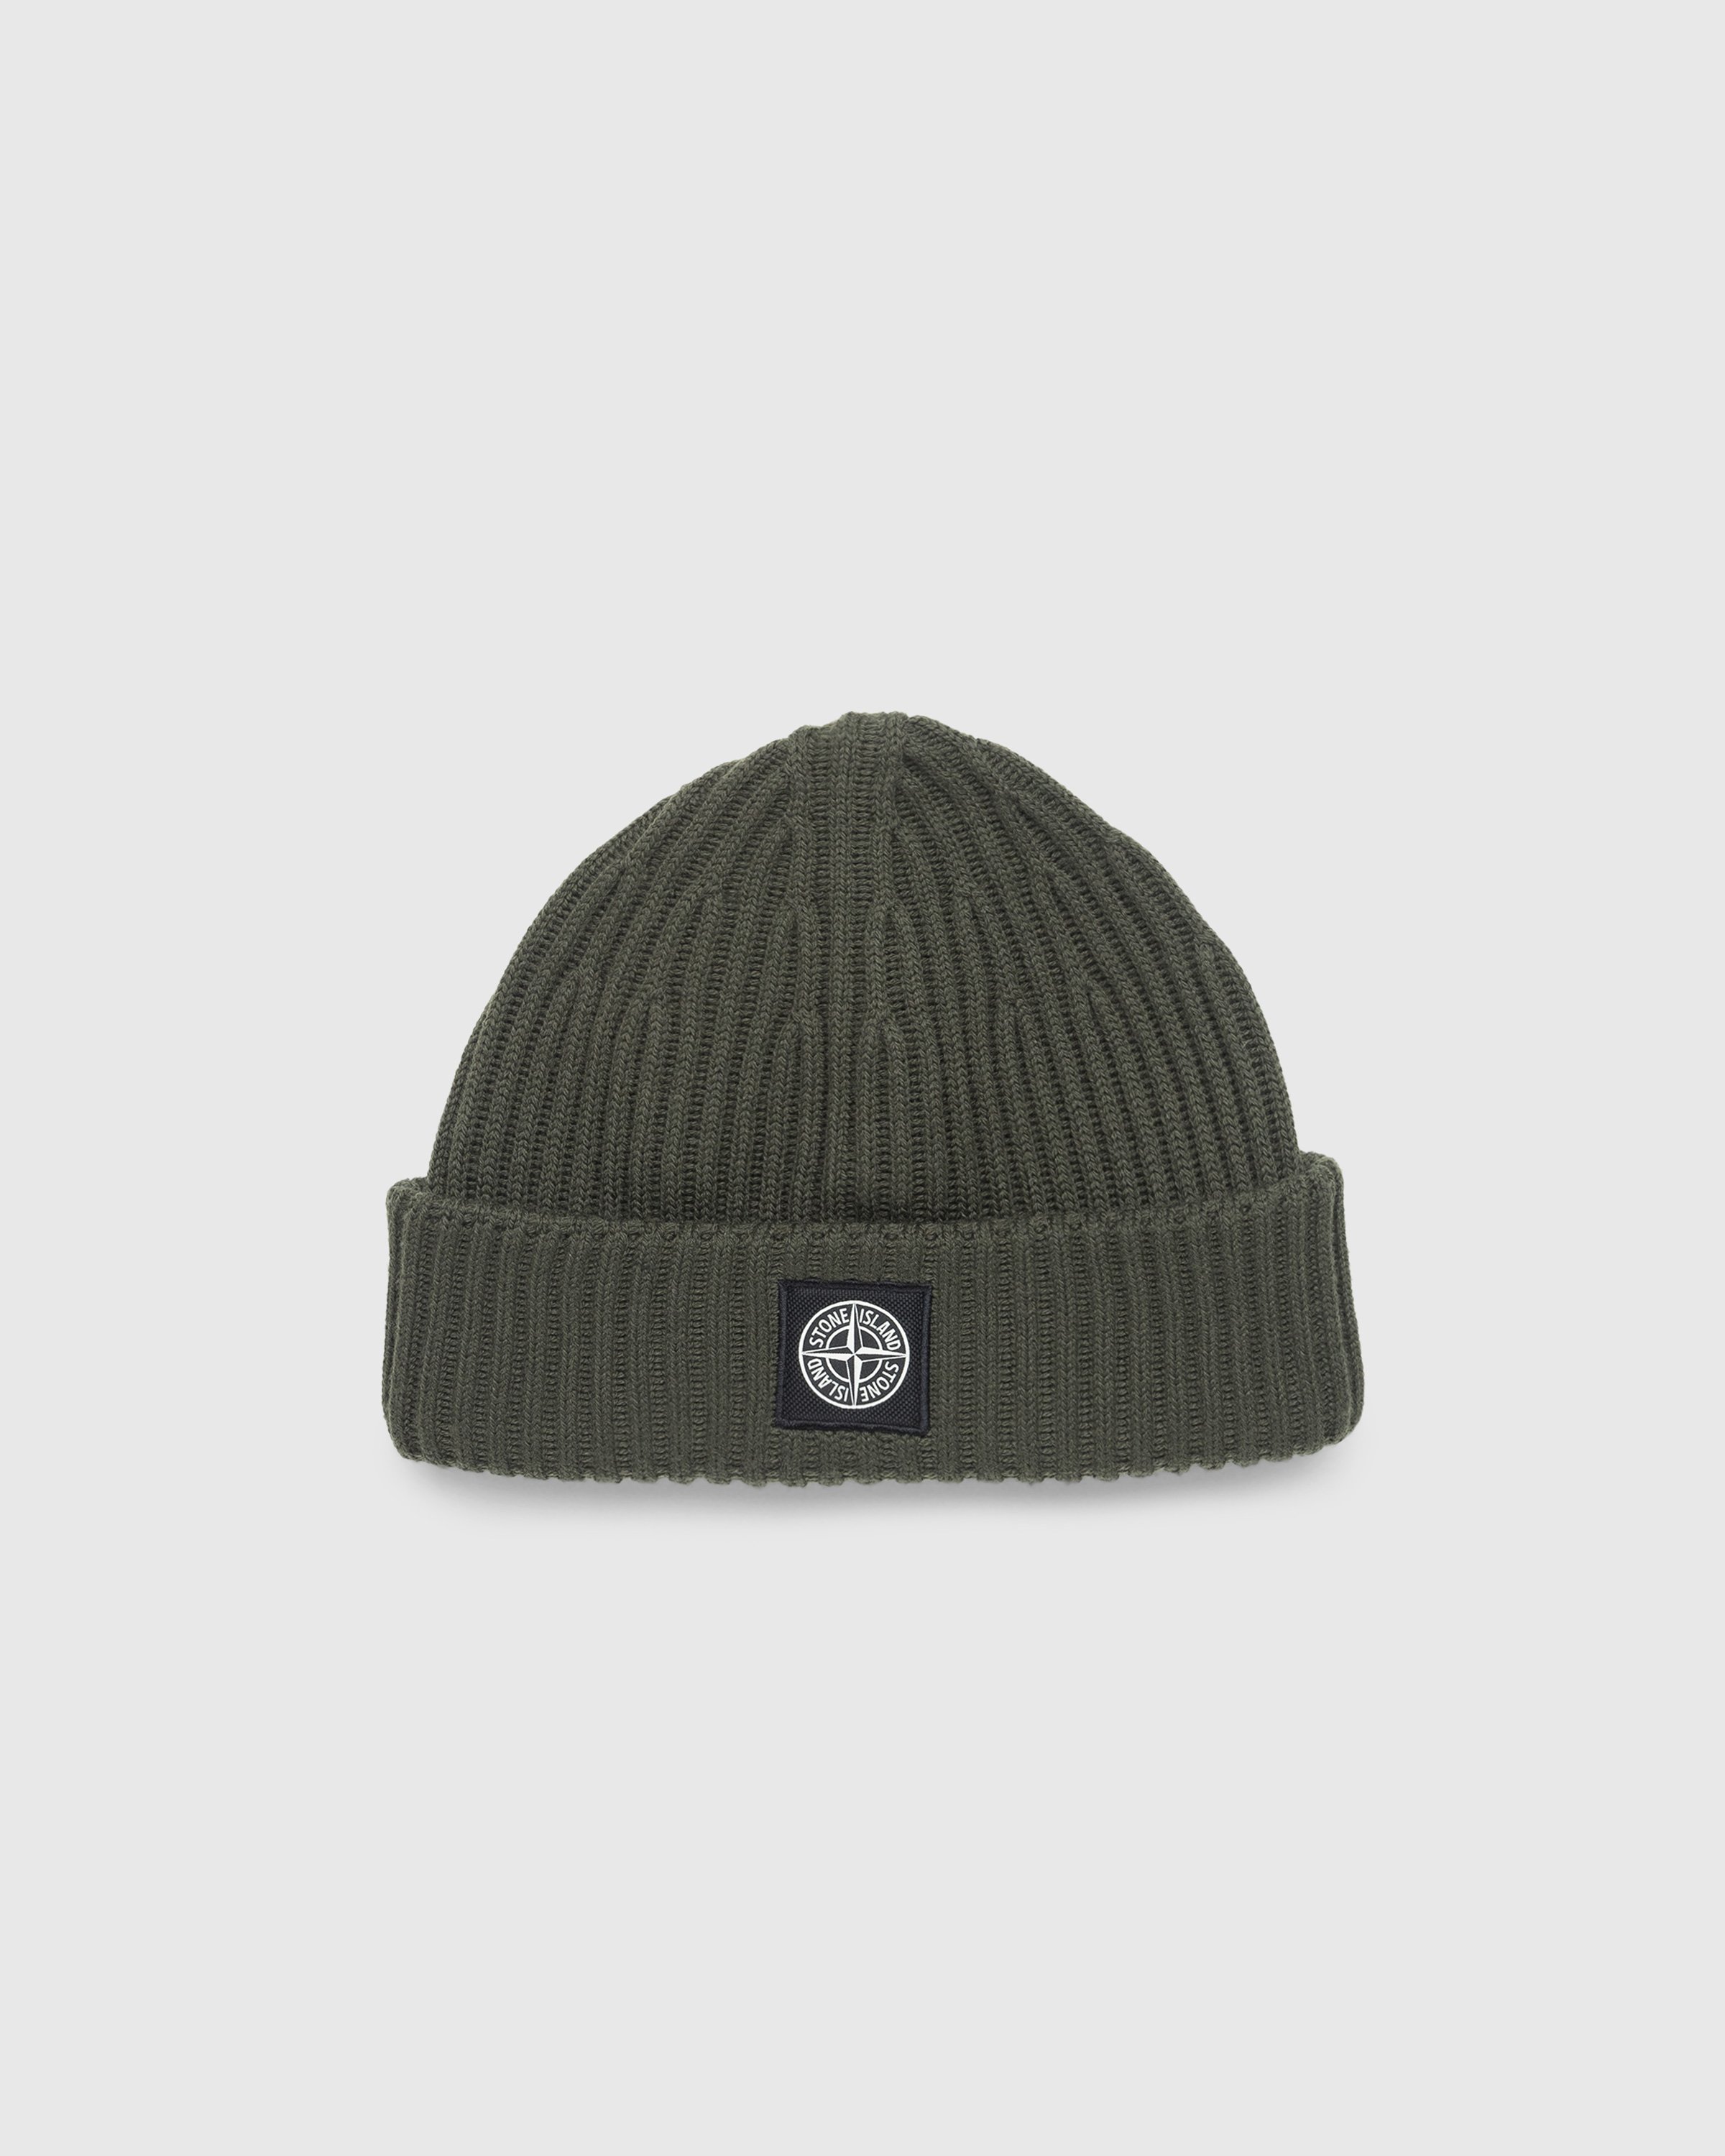 Stone Island - Ribbed Wool Beanie Olive - Accessories - Green - Image 1